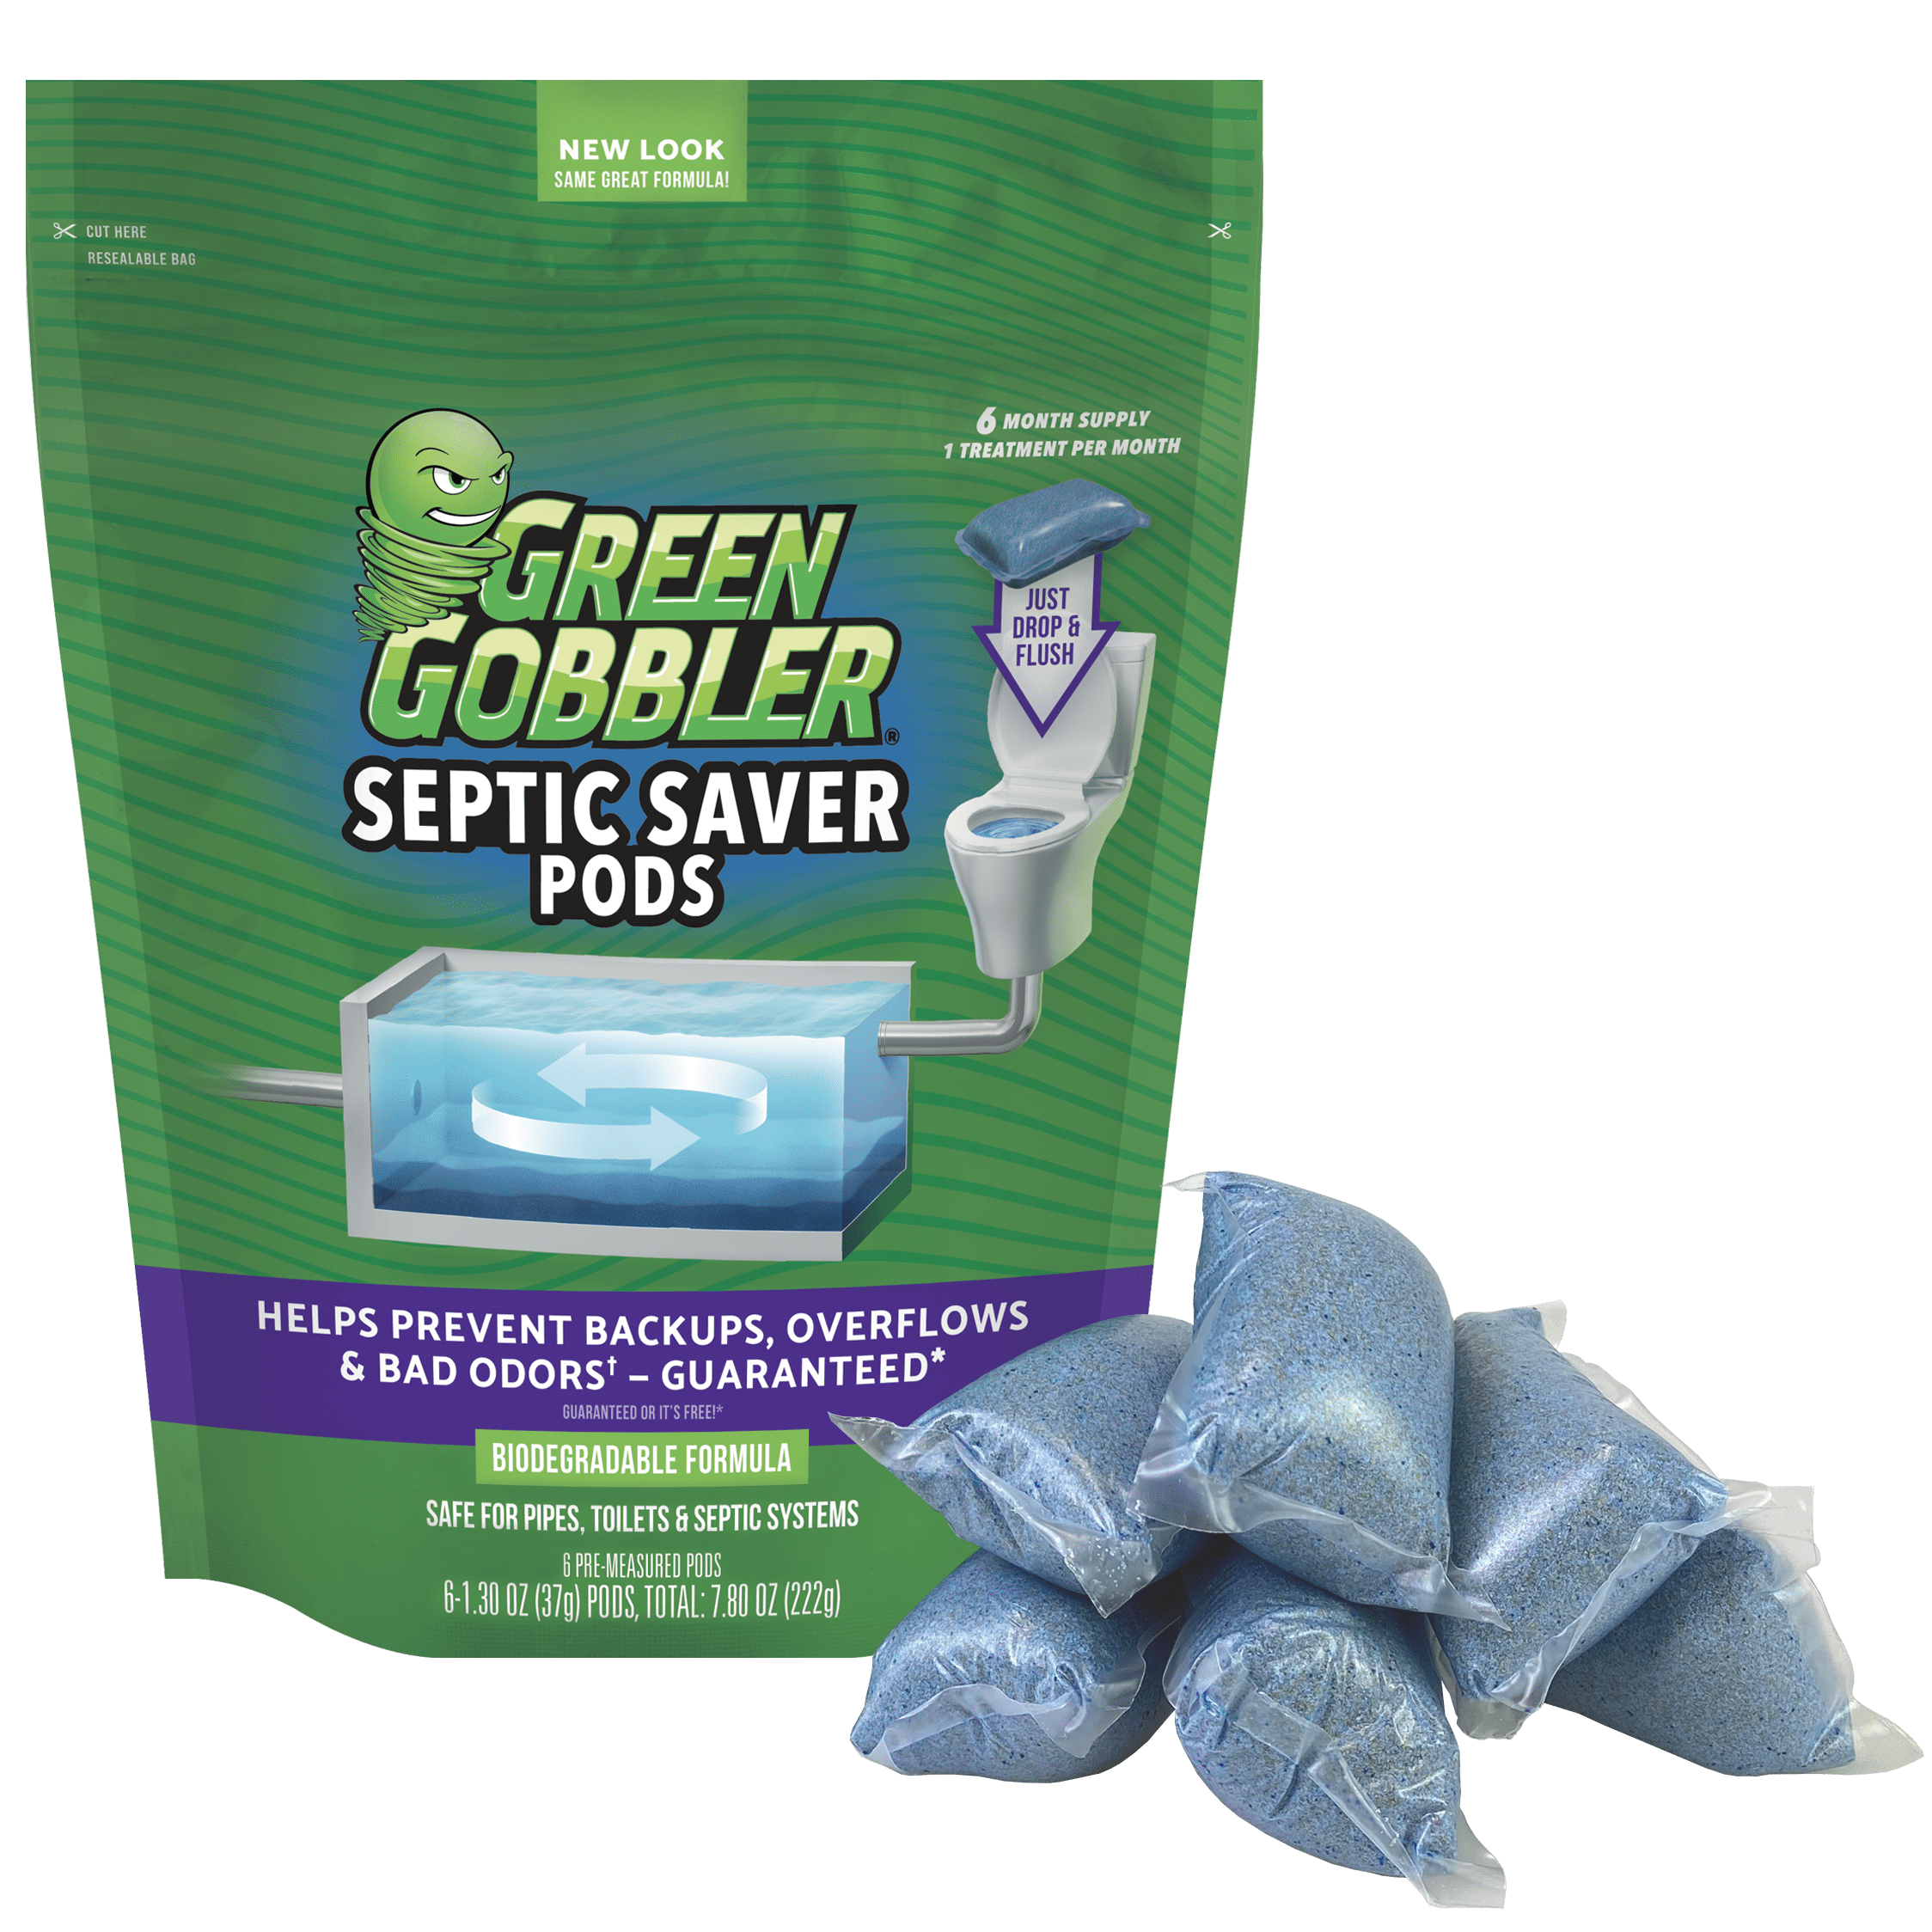 Green Gobbler Septic Saver Septic Treatment Pacs - 6 Month Supply - 6 Pre-Measured Pacs, Drop and Flush